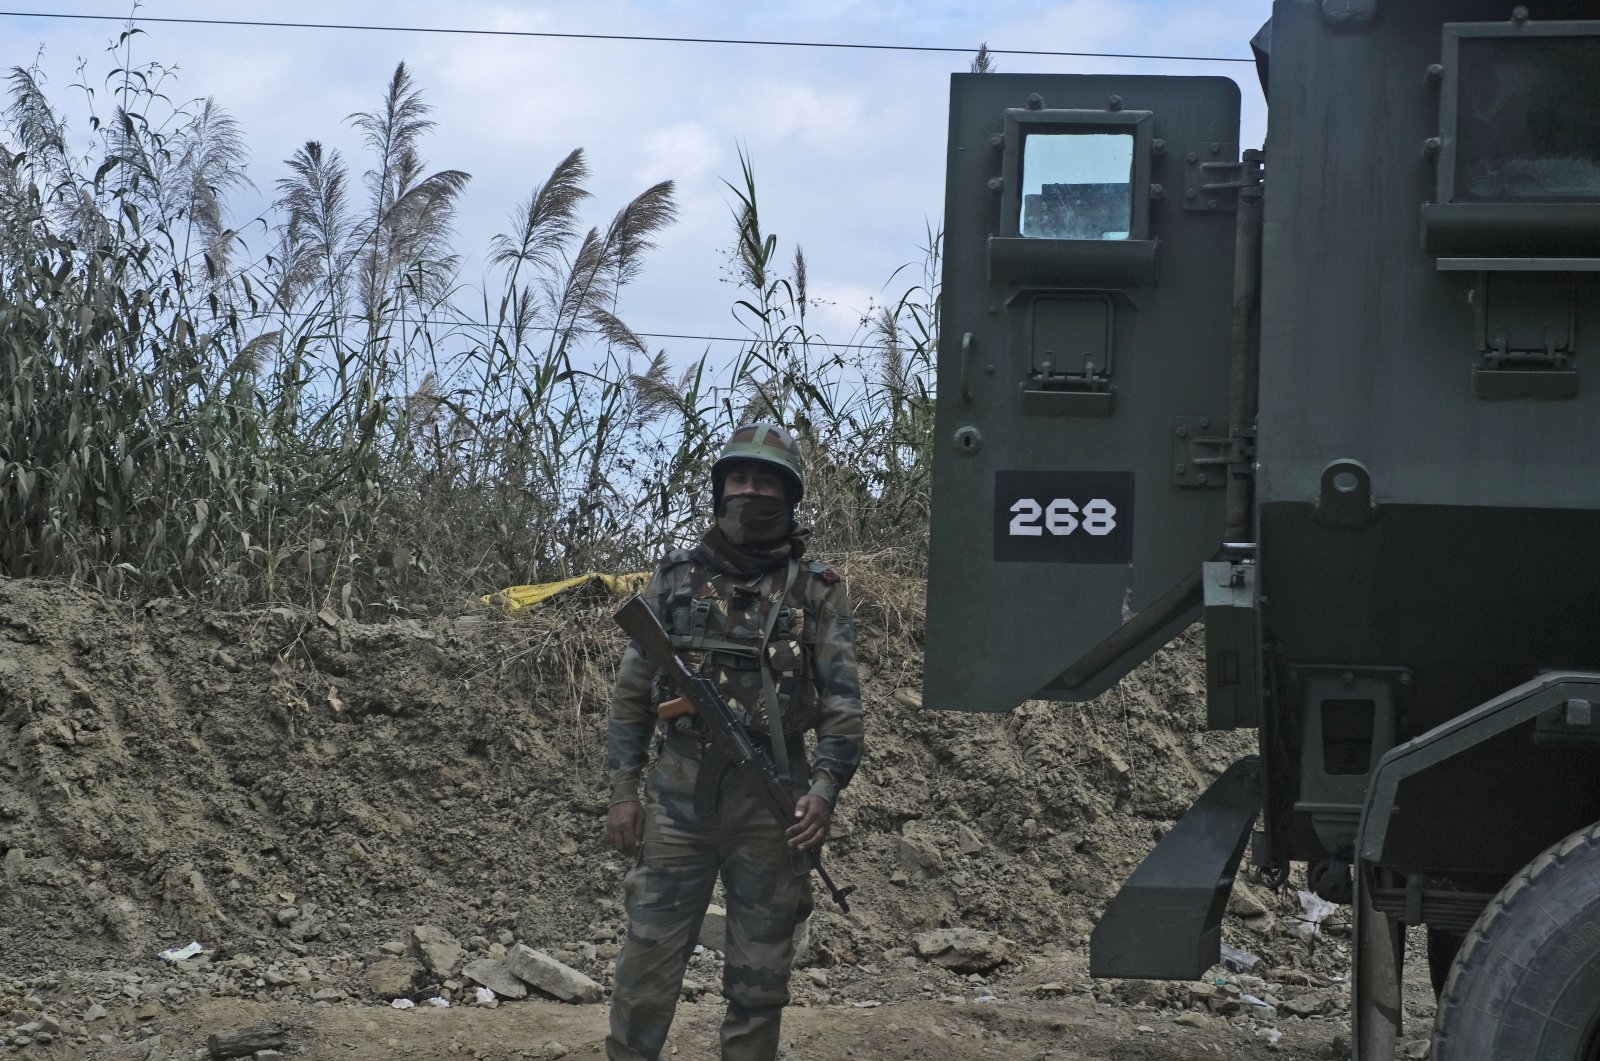 An Indian Army soldier stands guard on a highway on the outskirts of Kohima, capital of northeastern Nagaland state, India, Dec. 5, 2021. (AP Photo)